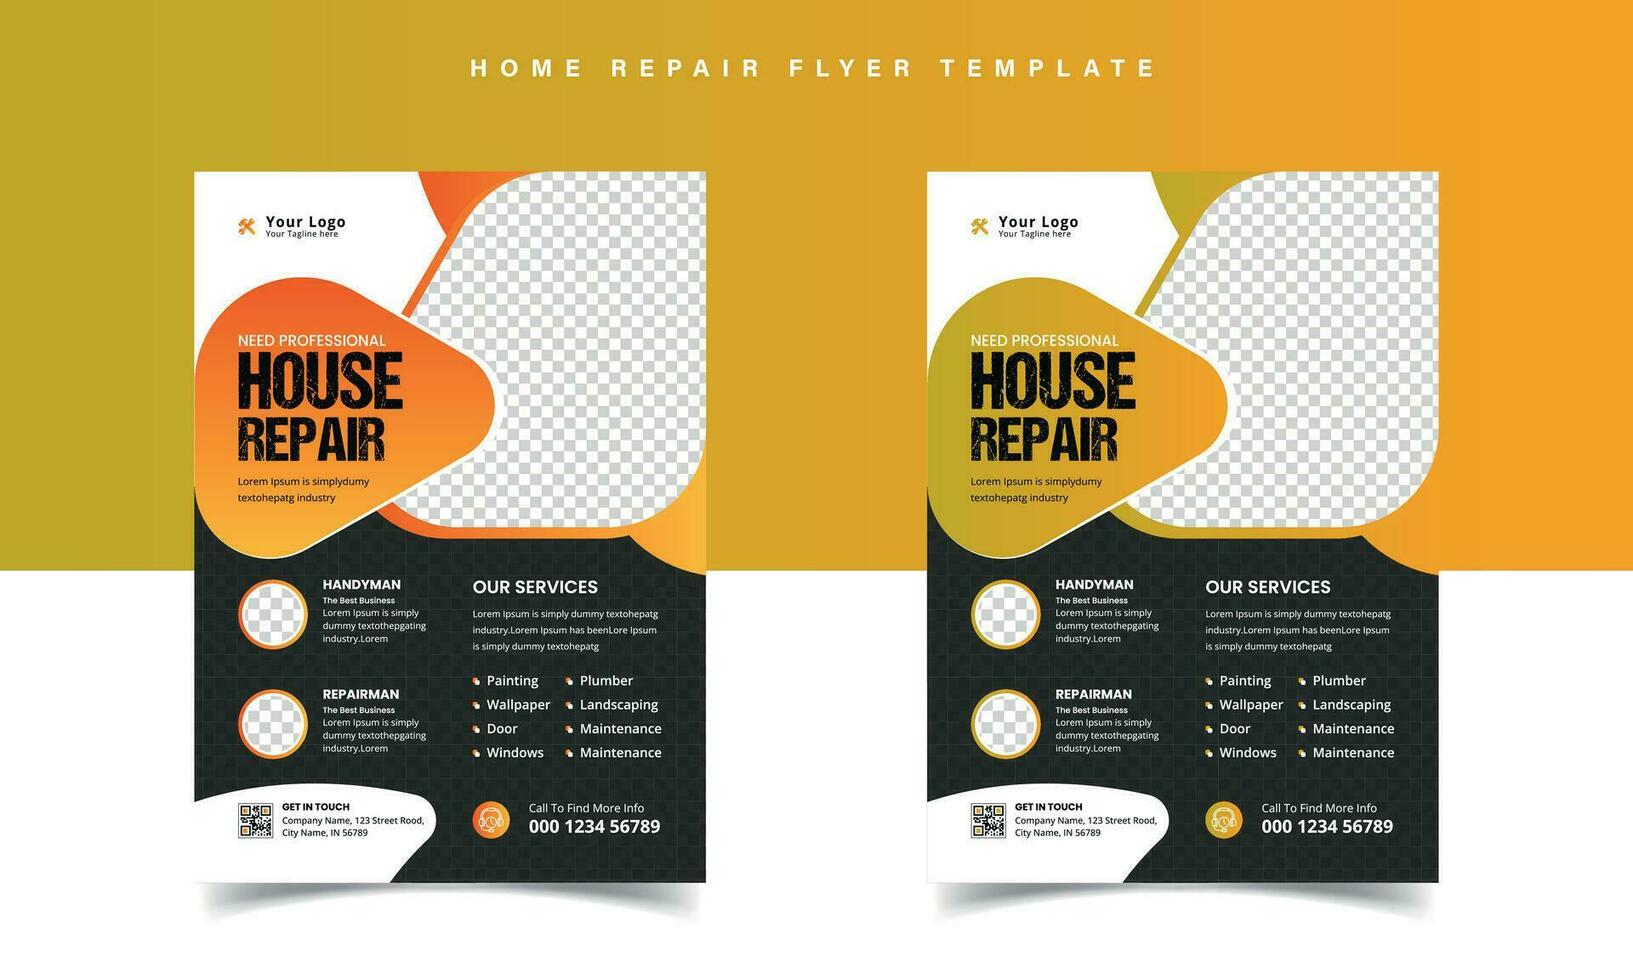 Home repair flyer template with Handyman leaflet design vector